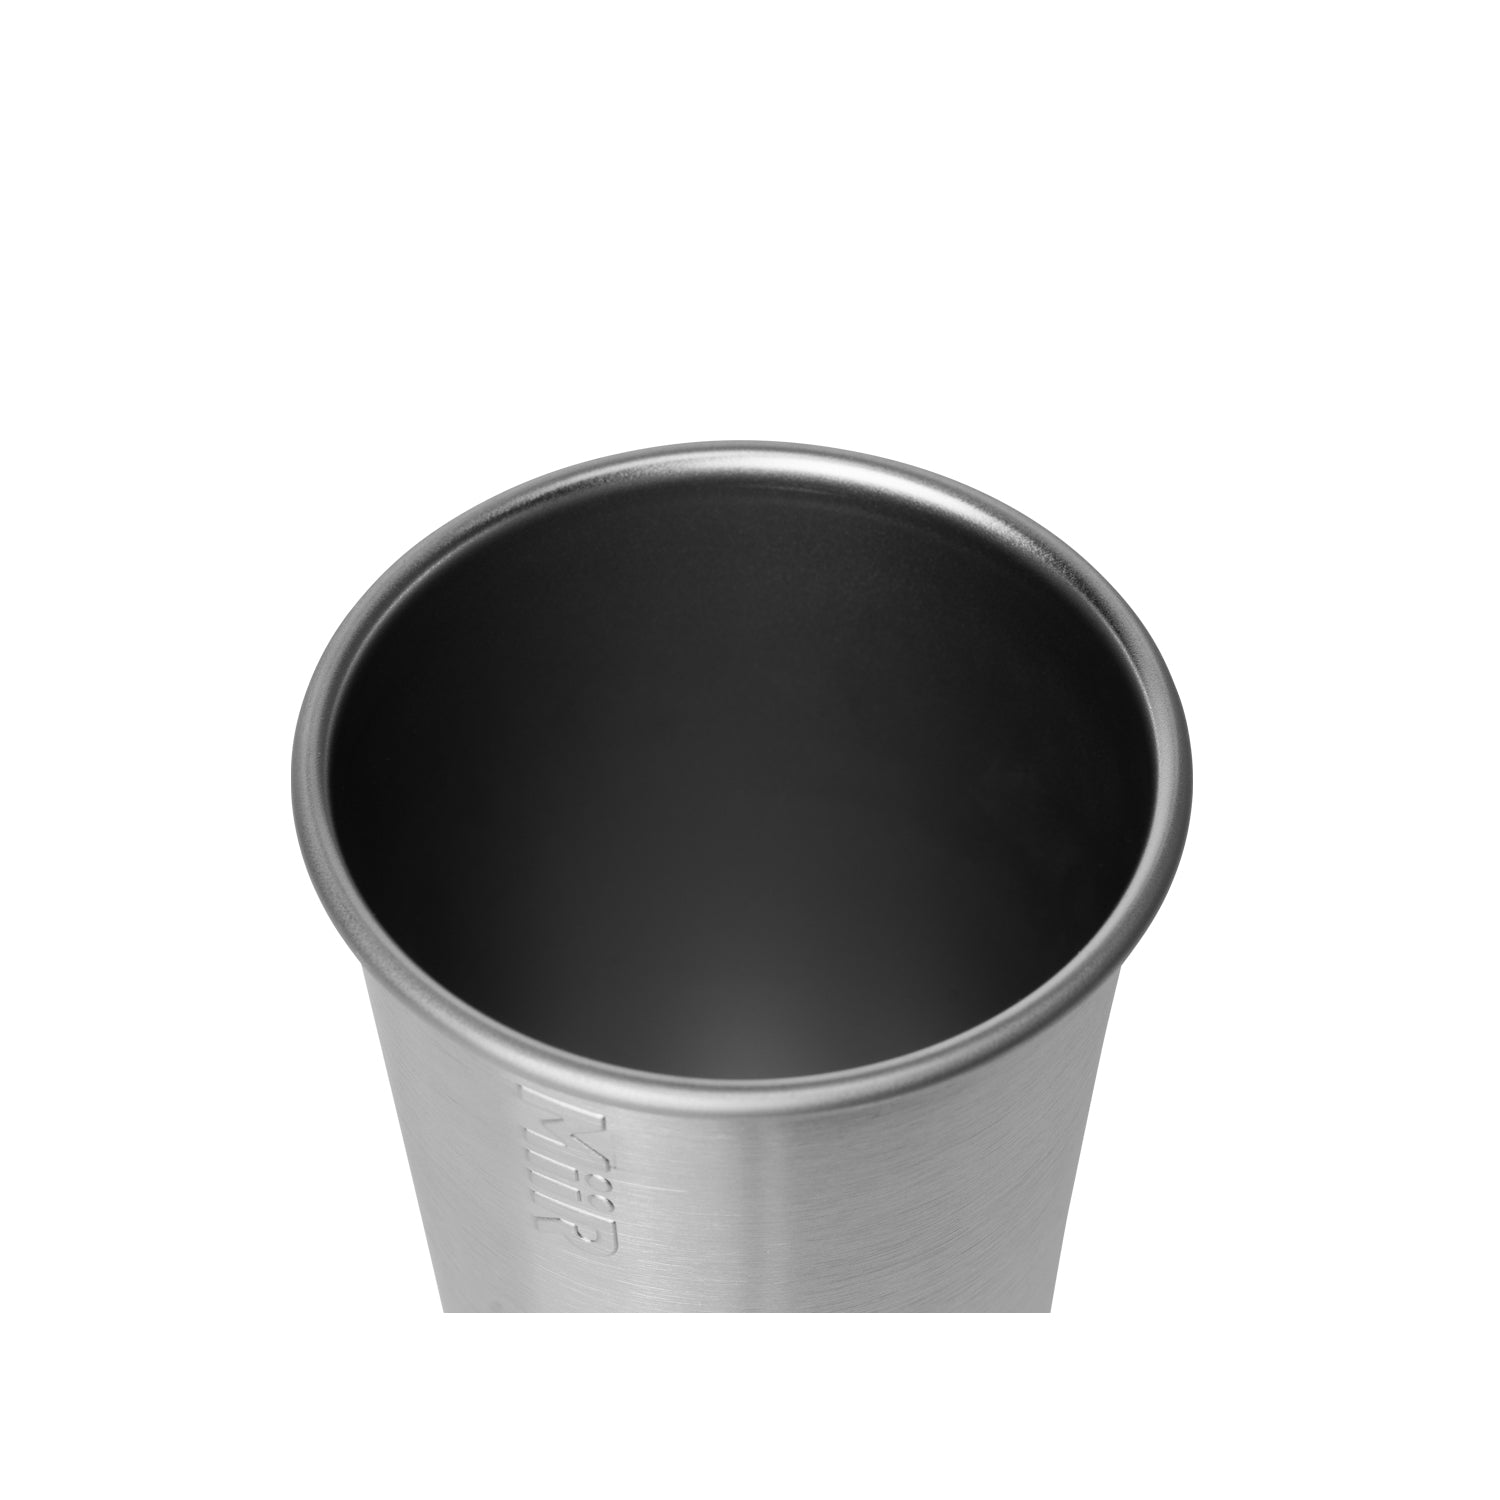 16 oz Stainless Steel Cup  16 oz Stainless Steel Pint Cup